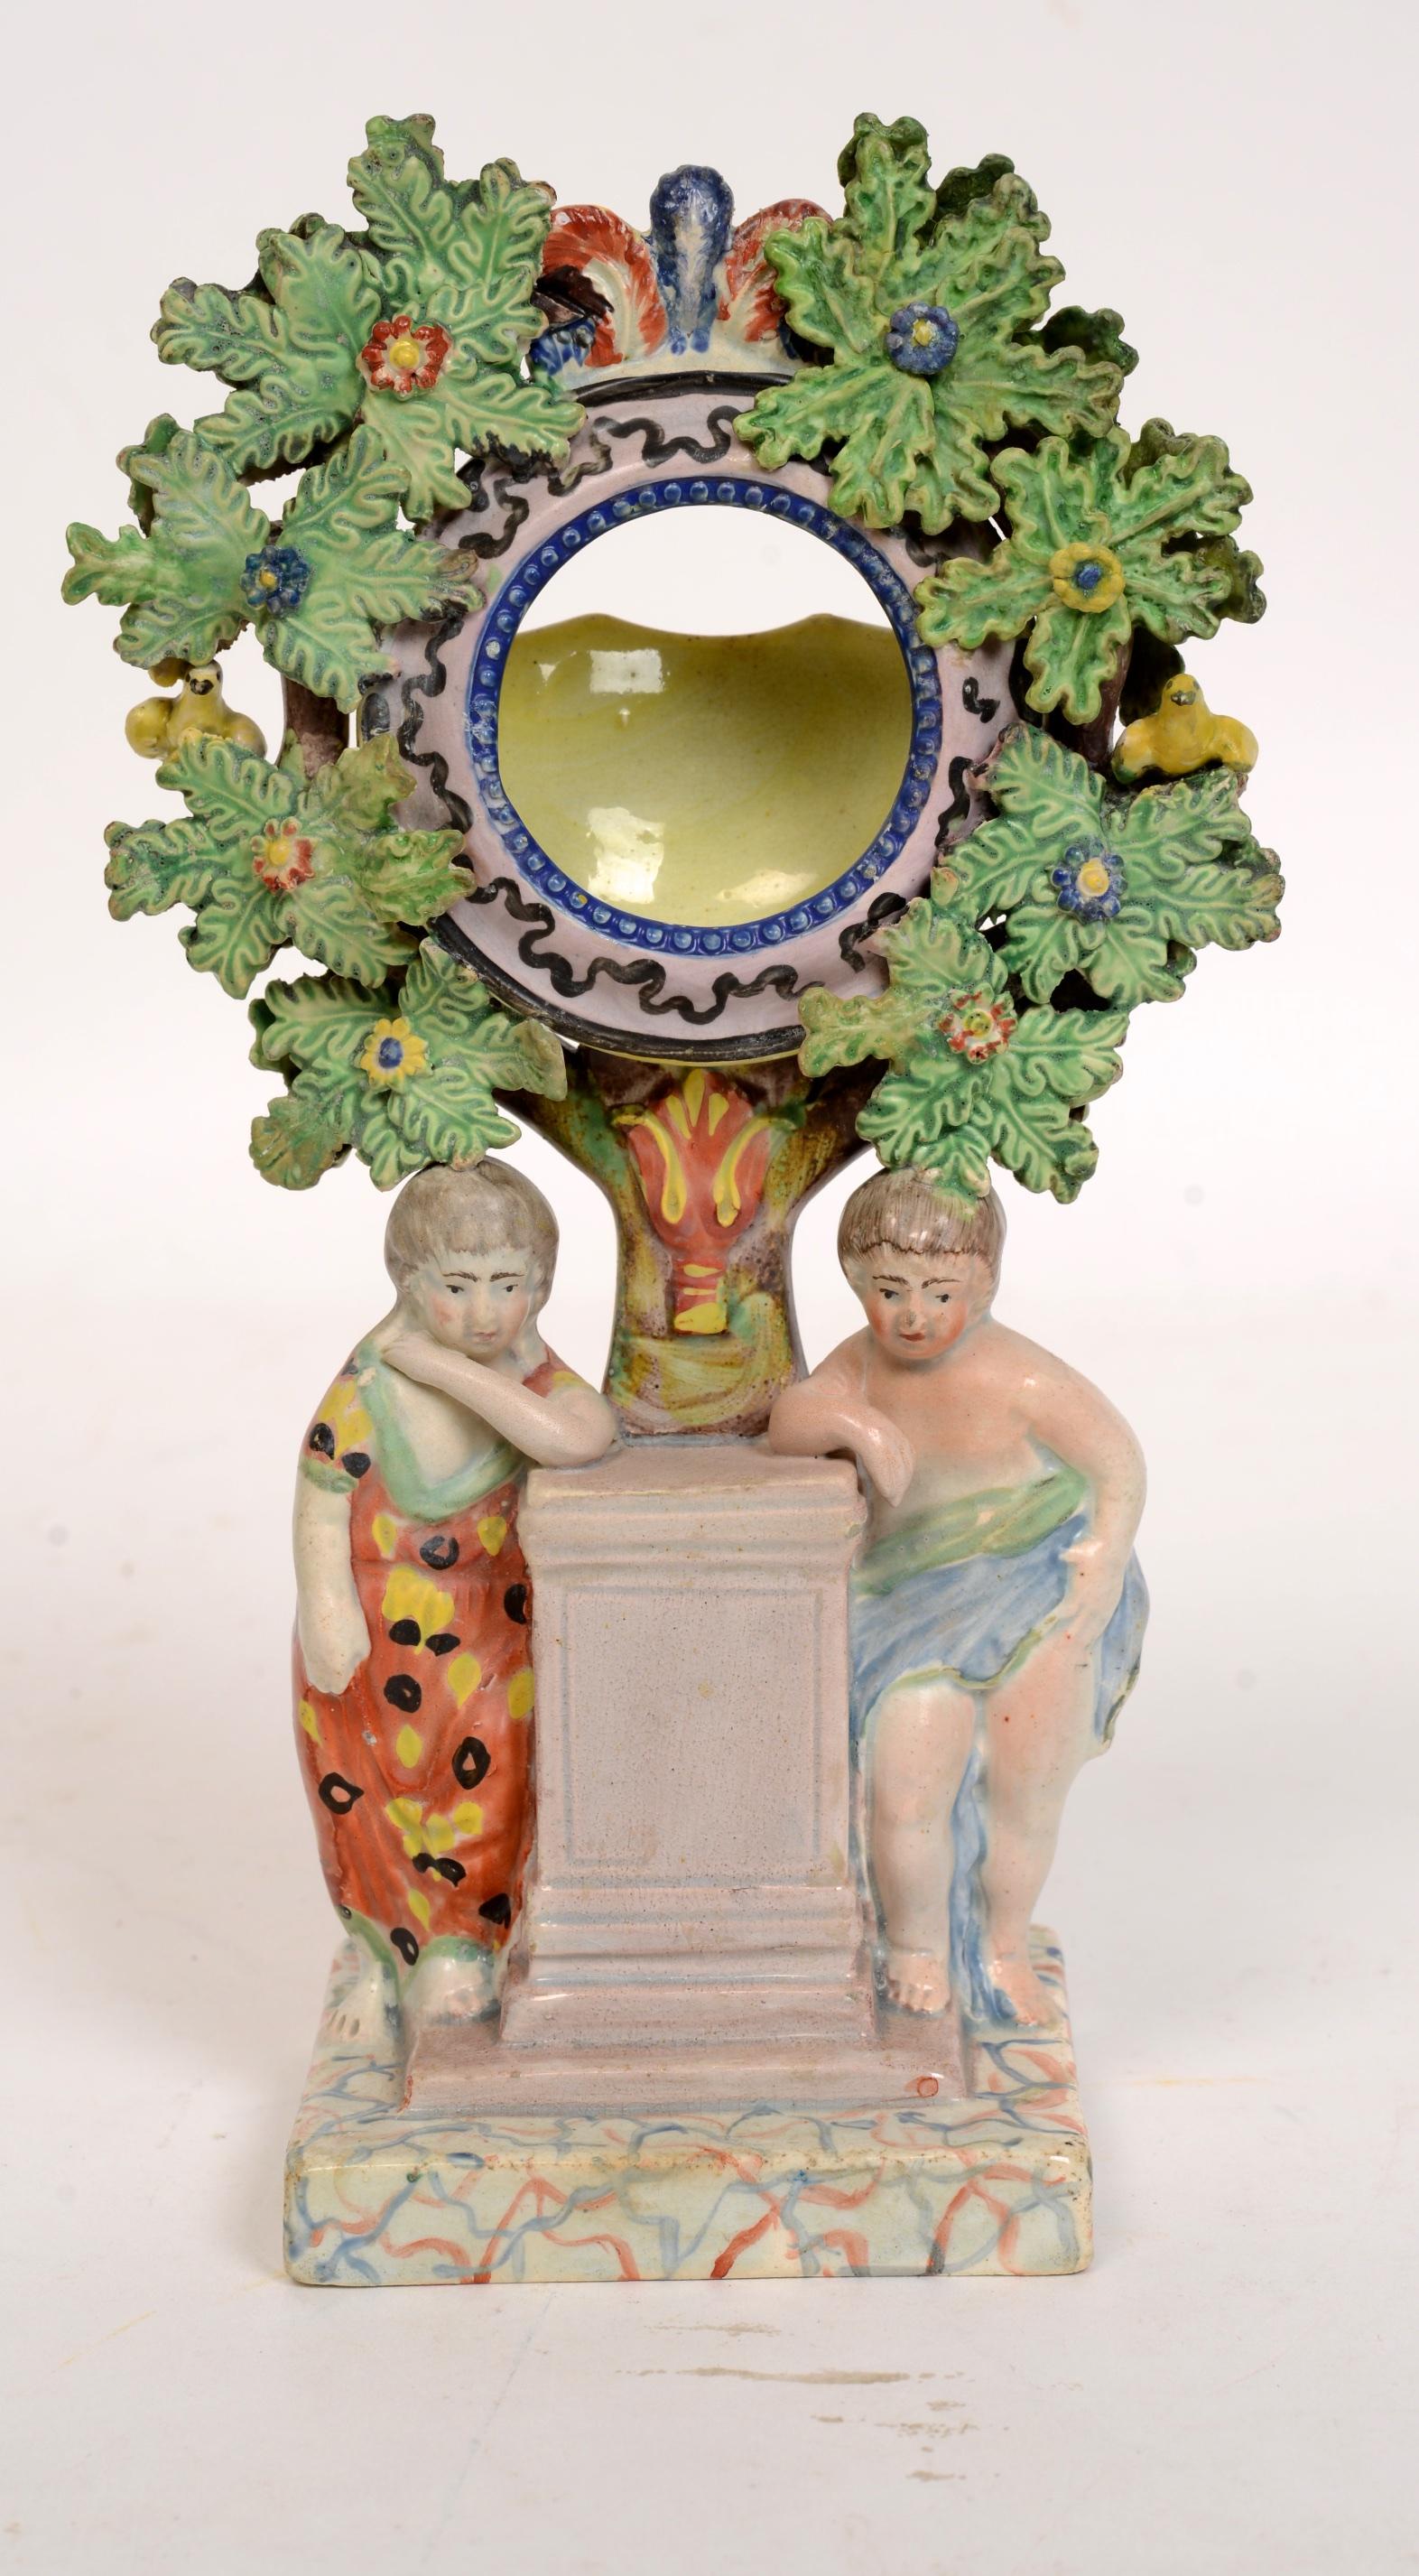 Staffordshire Pearlware Bocage figure watch holder, circa 1820. It is decorated in the round, (to the front and back.) This is a fine example of a Staffordshire pottery pearlware watch holder with two cherubs flanking a pillar, the watch holder is